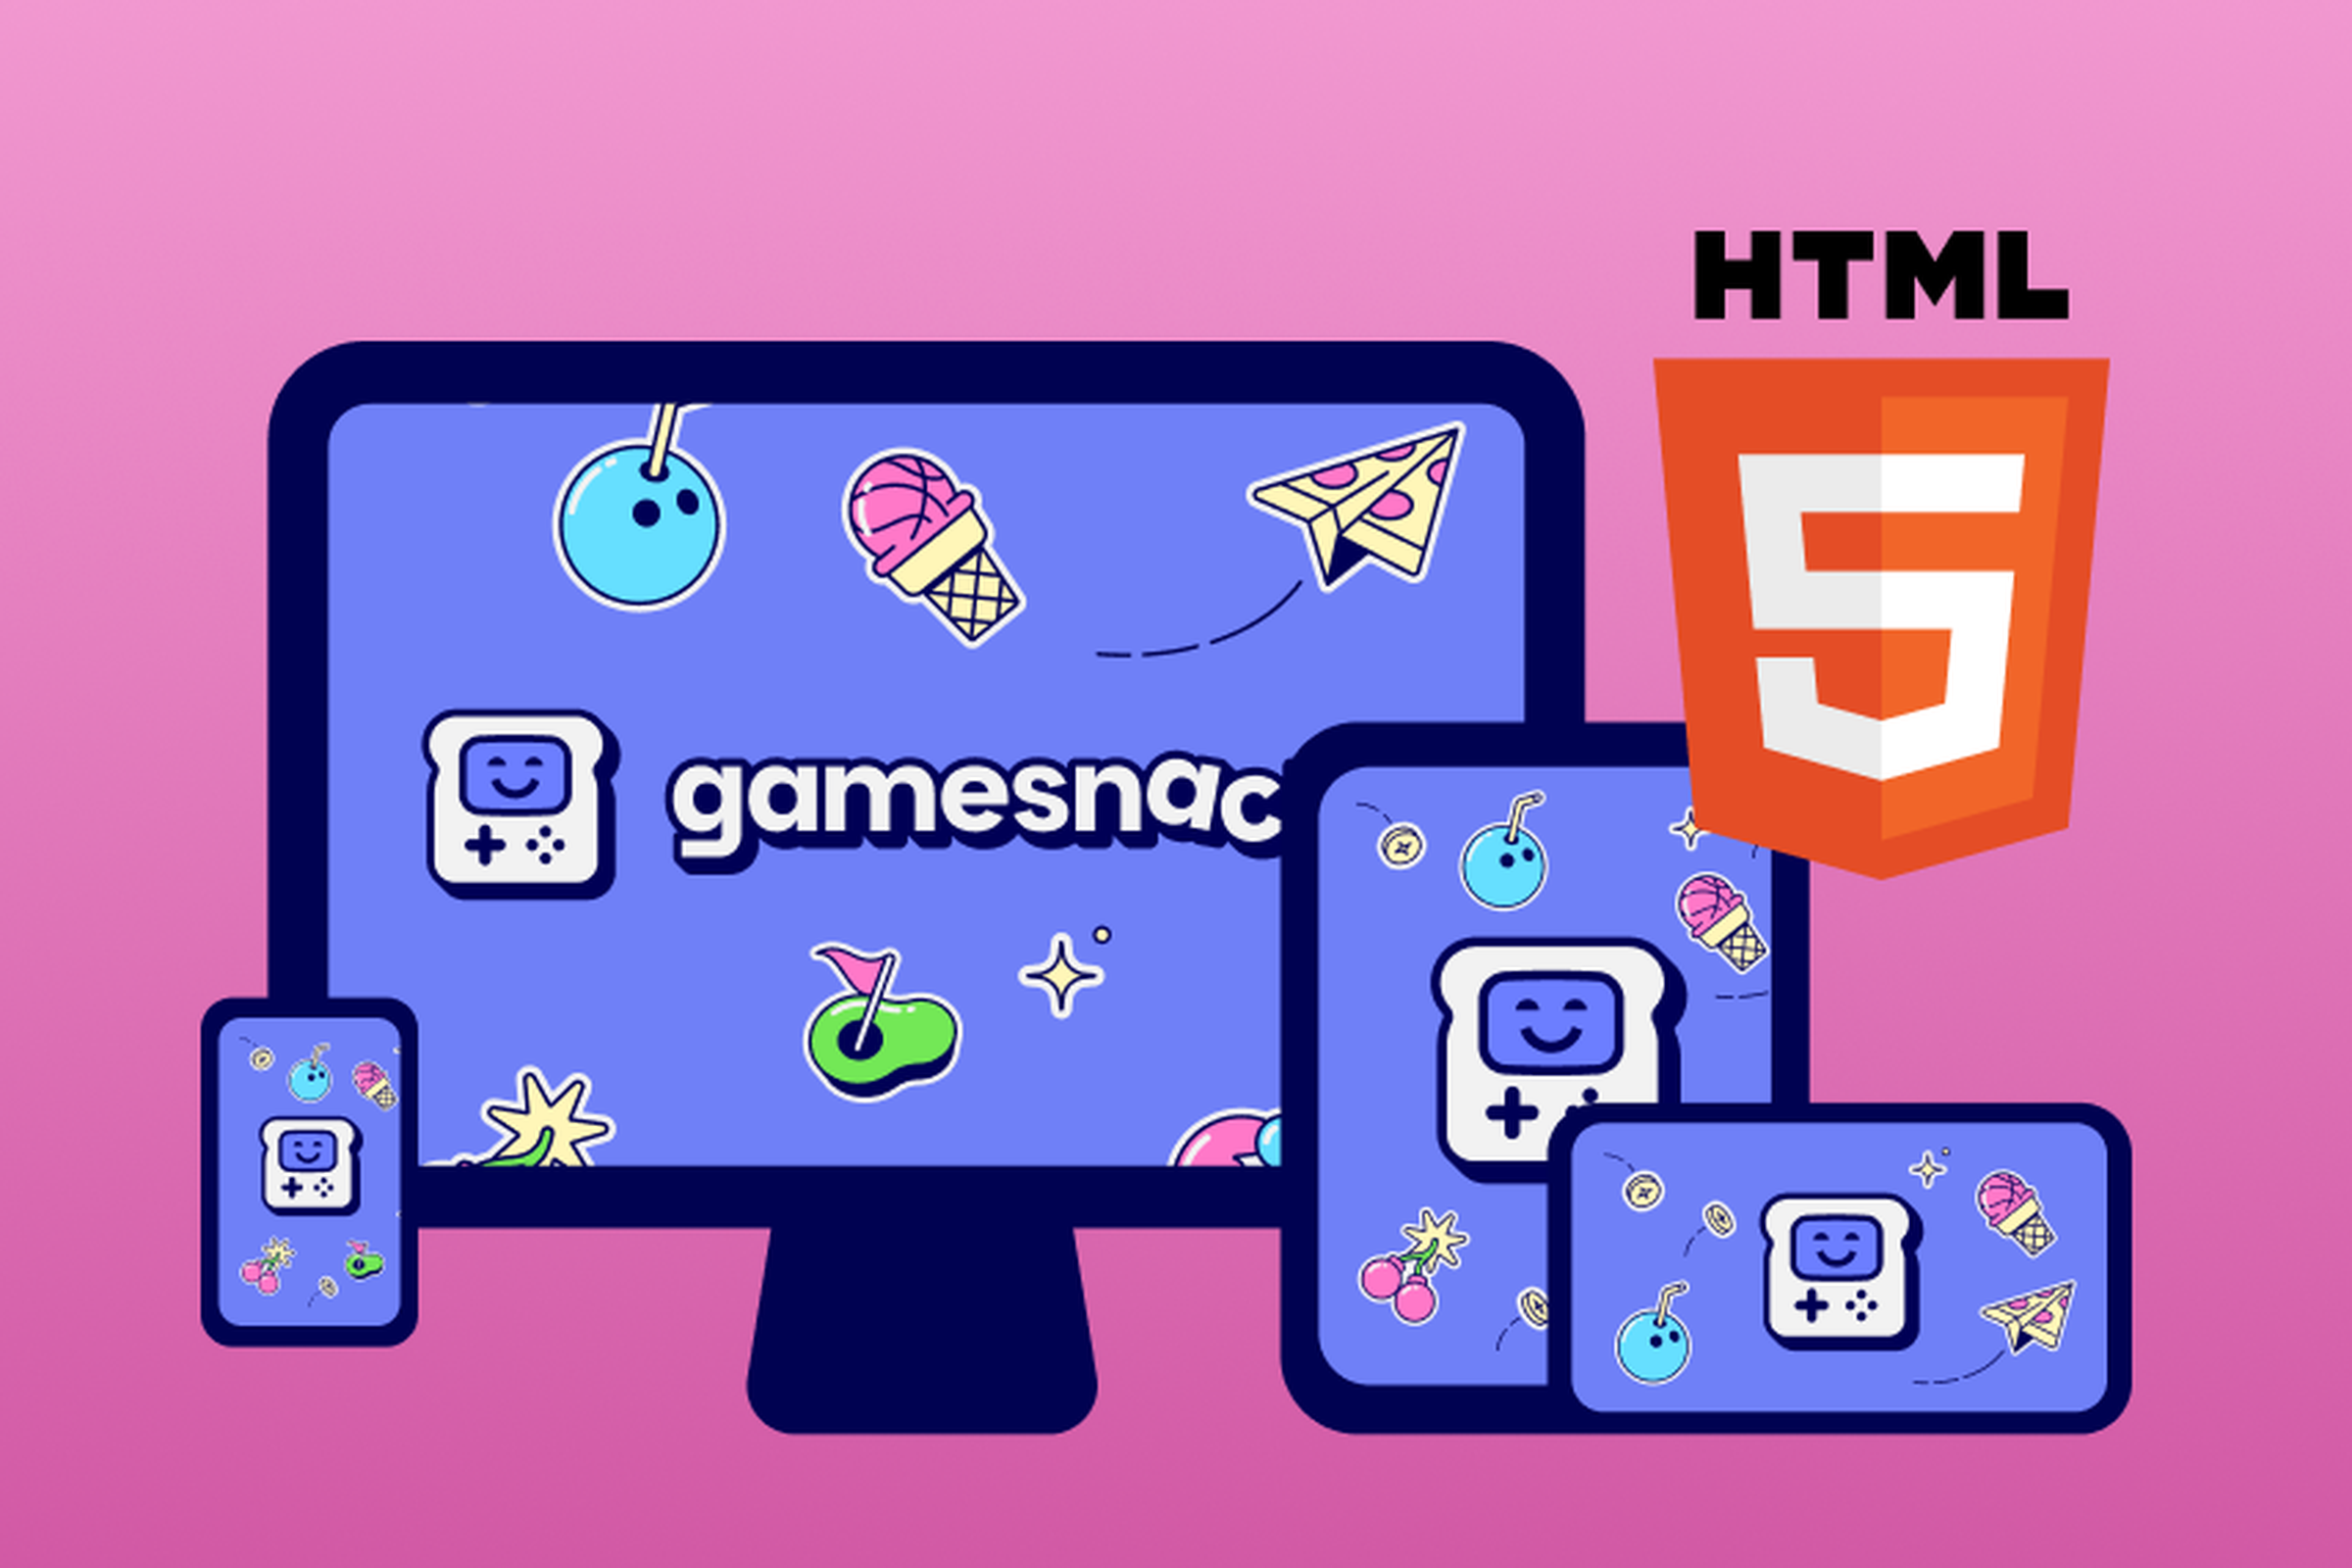 Html games. Html5 games. Play html games. Android auto игры Gamesnacks. Game html file game